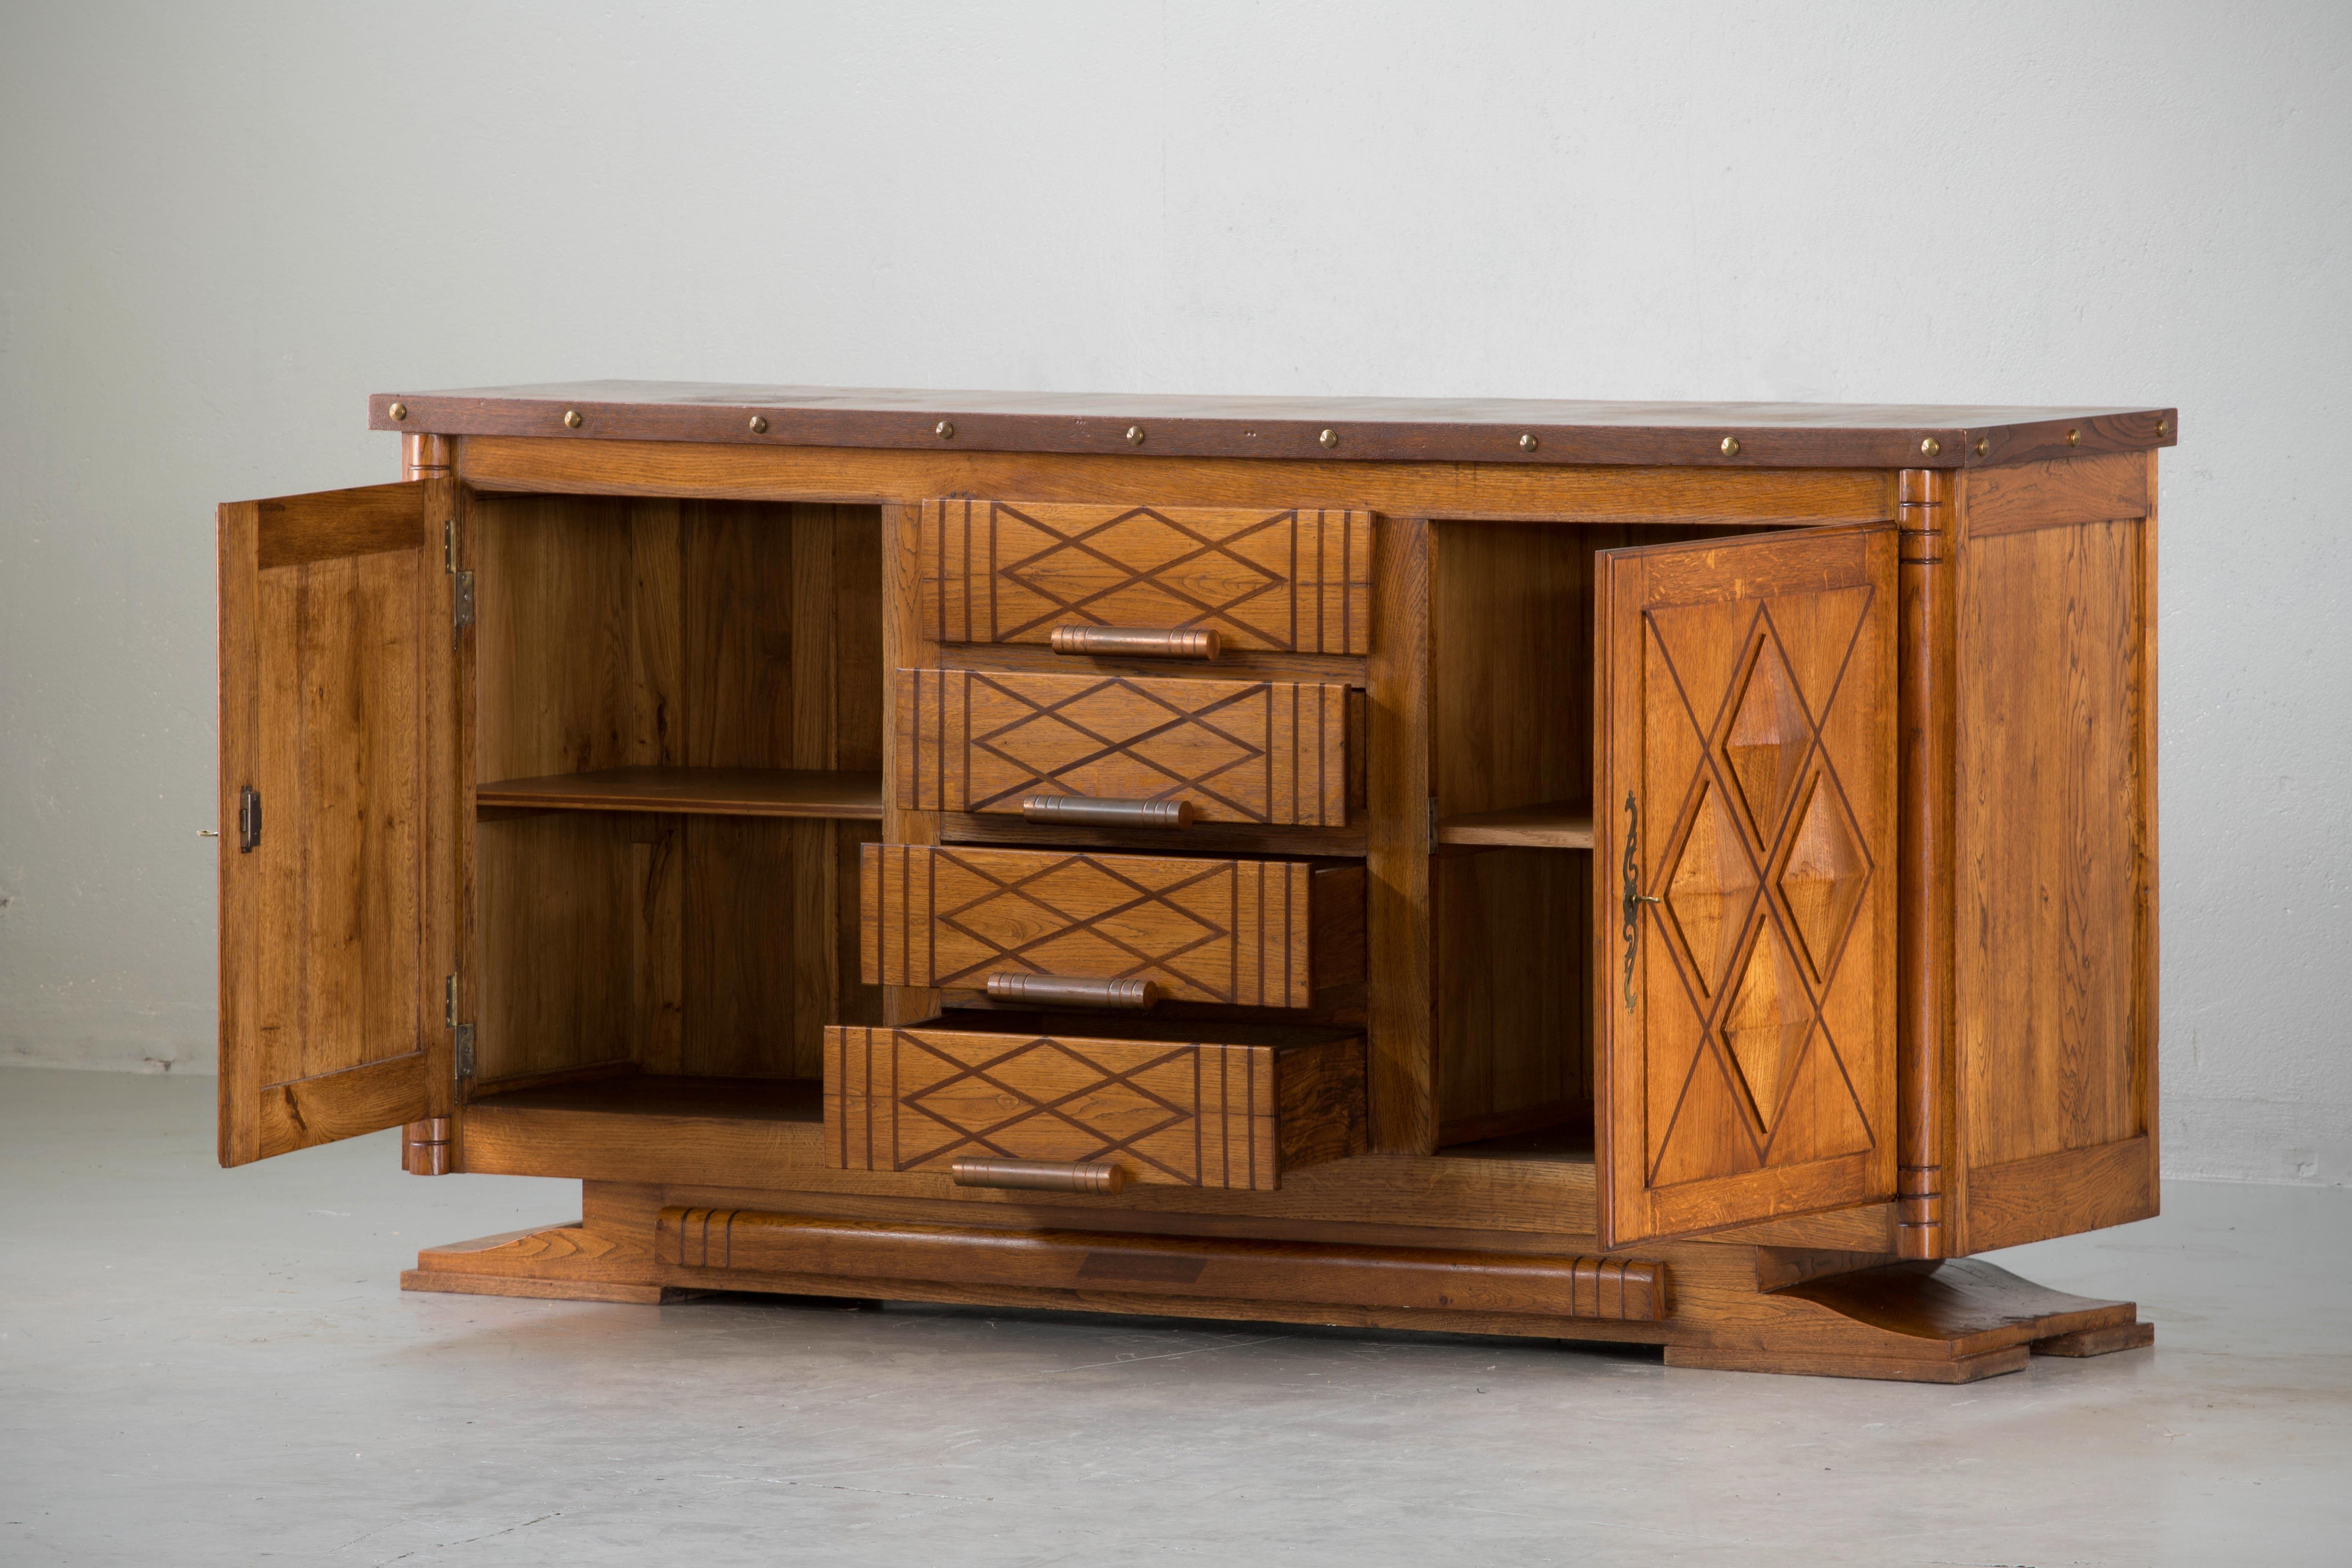 French Art Deco sideboard, Brutalist credenza. The sideboard features stunning oakwood grain. It offers ample storage, with shelve behind two sculpted doors on the sides and dovetailed drawers in the centre. Both sides of the cabinet lock, and two